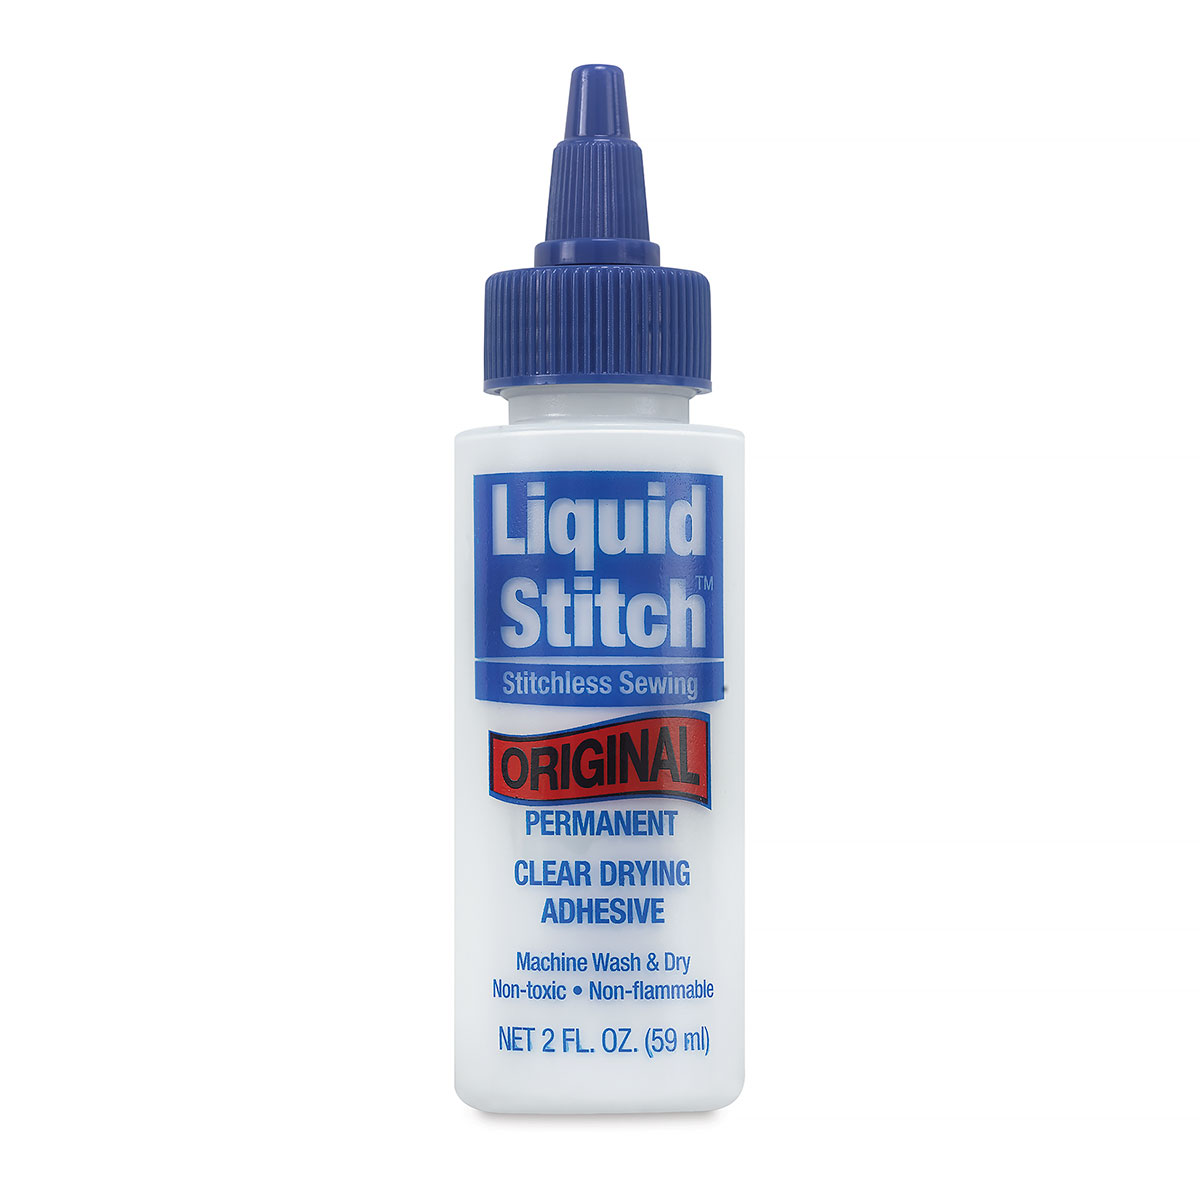 LIQUID FUSION ADHESIVE, NON TOXIC, DRIES CLEAR, WORKS on FABRIC